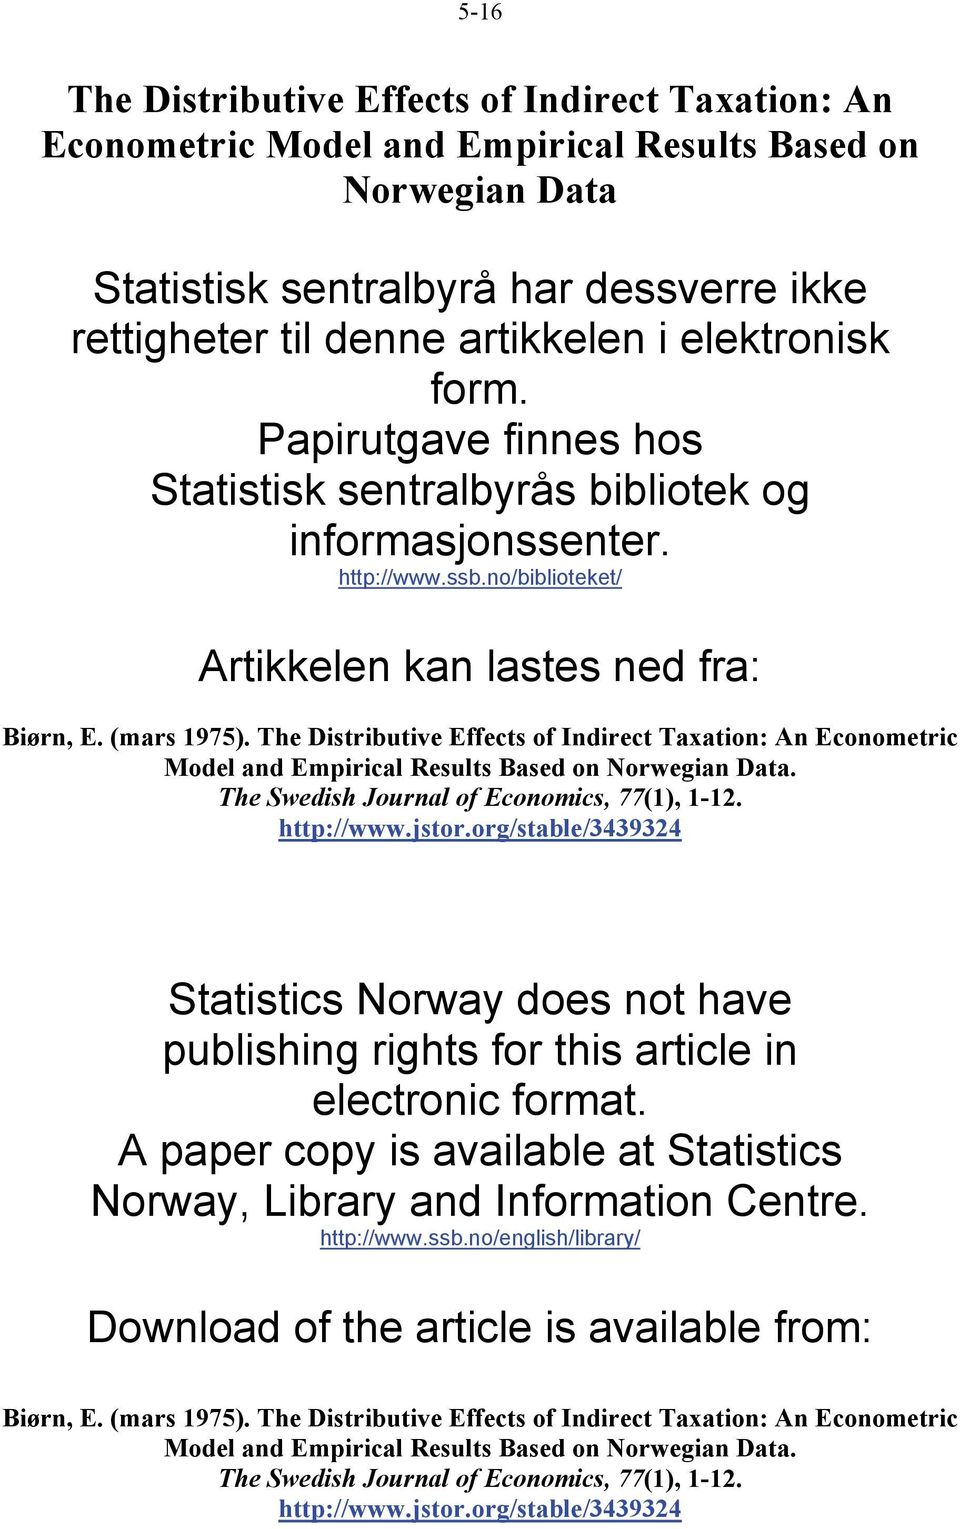 The Distributive Effects of Indirect Taxation: An Econometric Model and Empirical Results Based on Norwegian Data. The Swedish Journal of Economics, 77(1), 1-12. http://www.jstor.